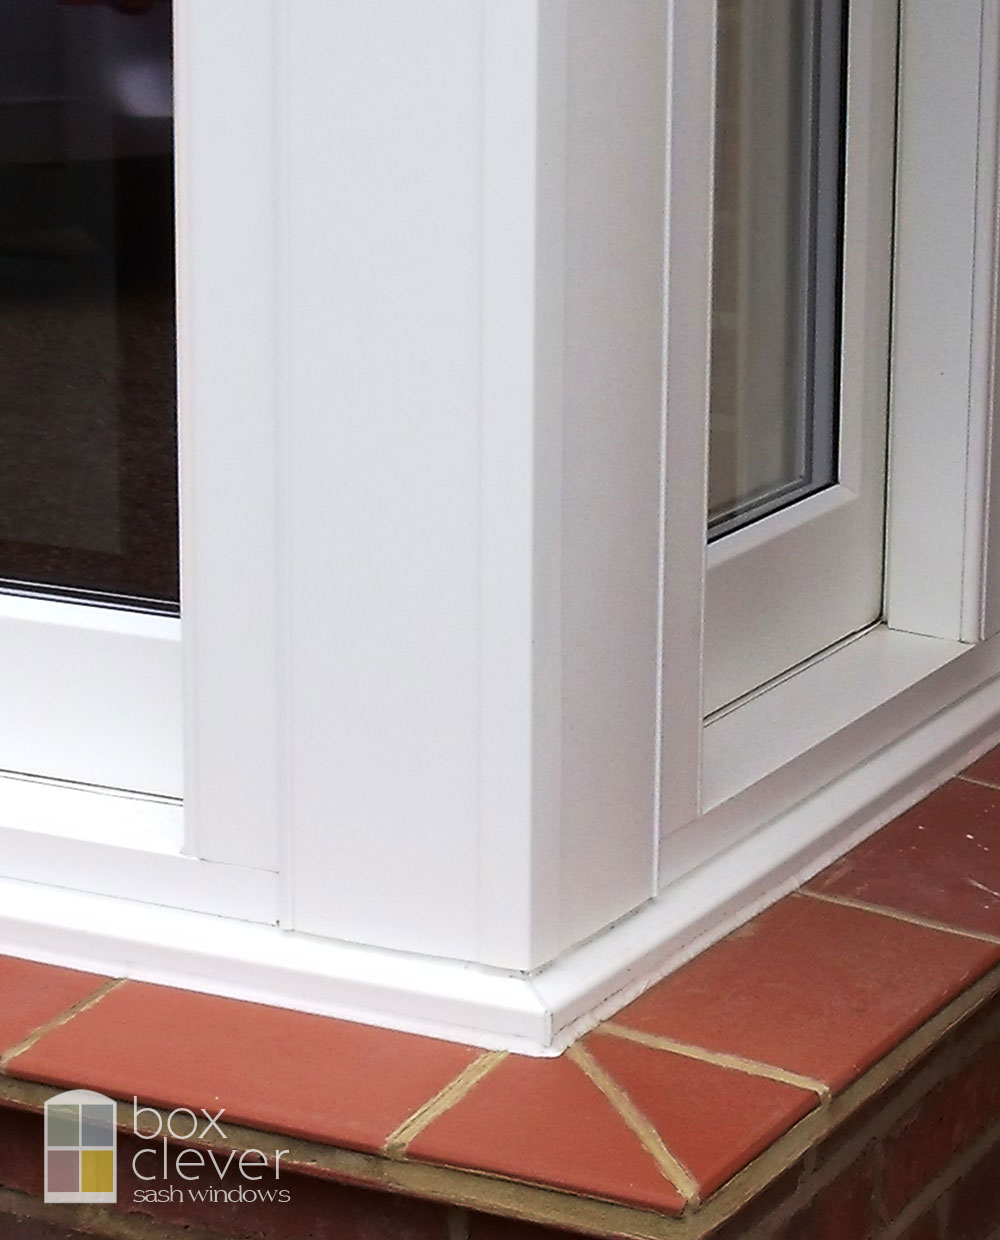 Masterframe Bygone Collection UPVC Sash Windows - Connected Bay Corner Post and Cill - Camberley